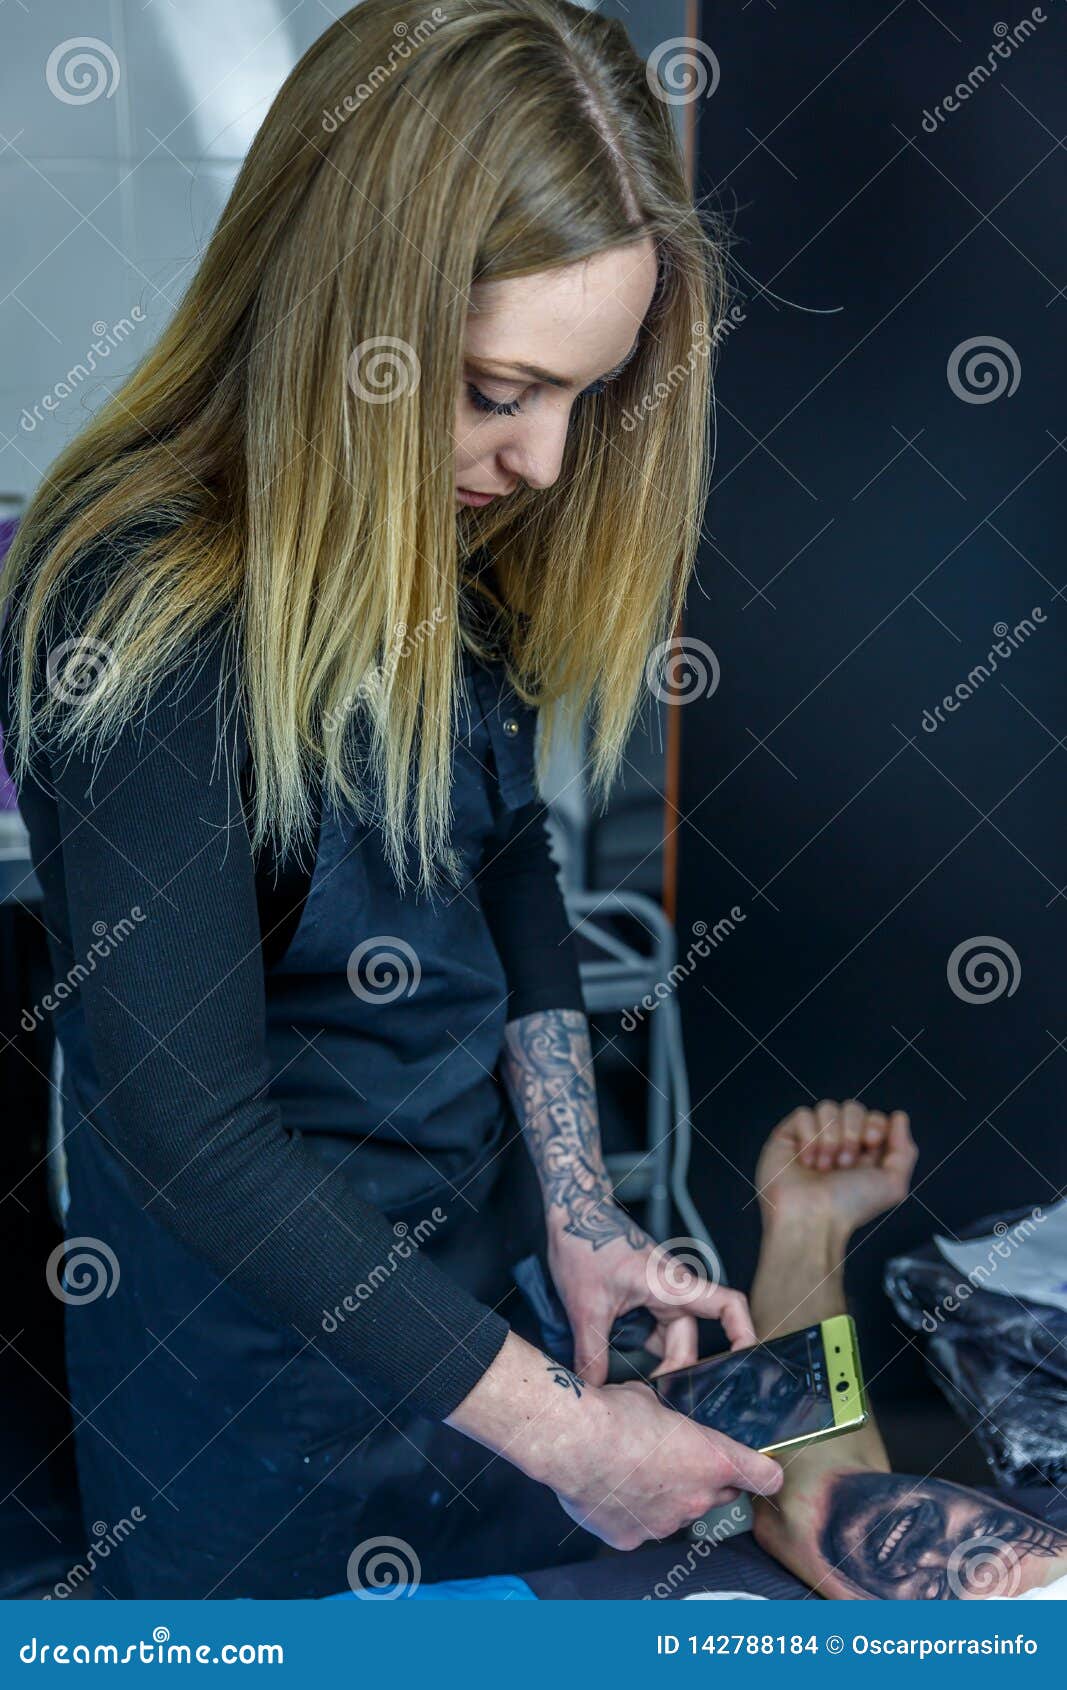 A Blonde Artist is Taking a Picture of the Tattoo she is Doing To Her ...